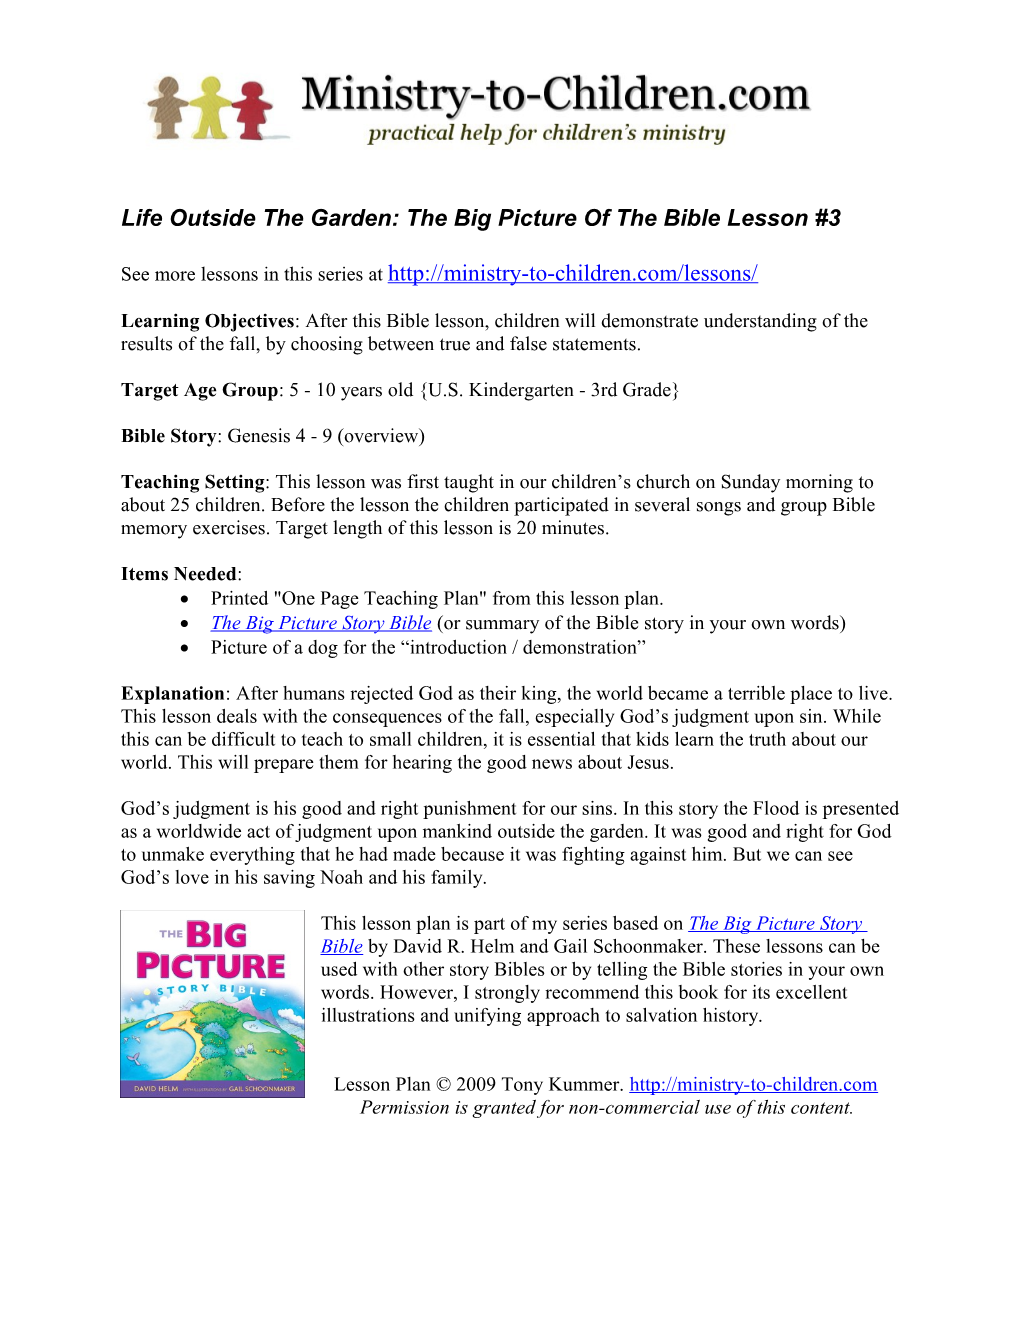 Life Outside the Garden: the Big Picture of the Bible Lesson #3